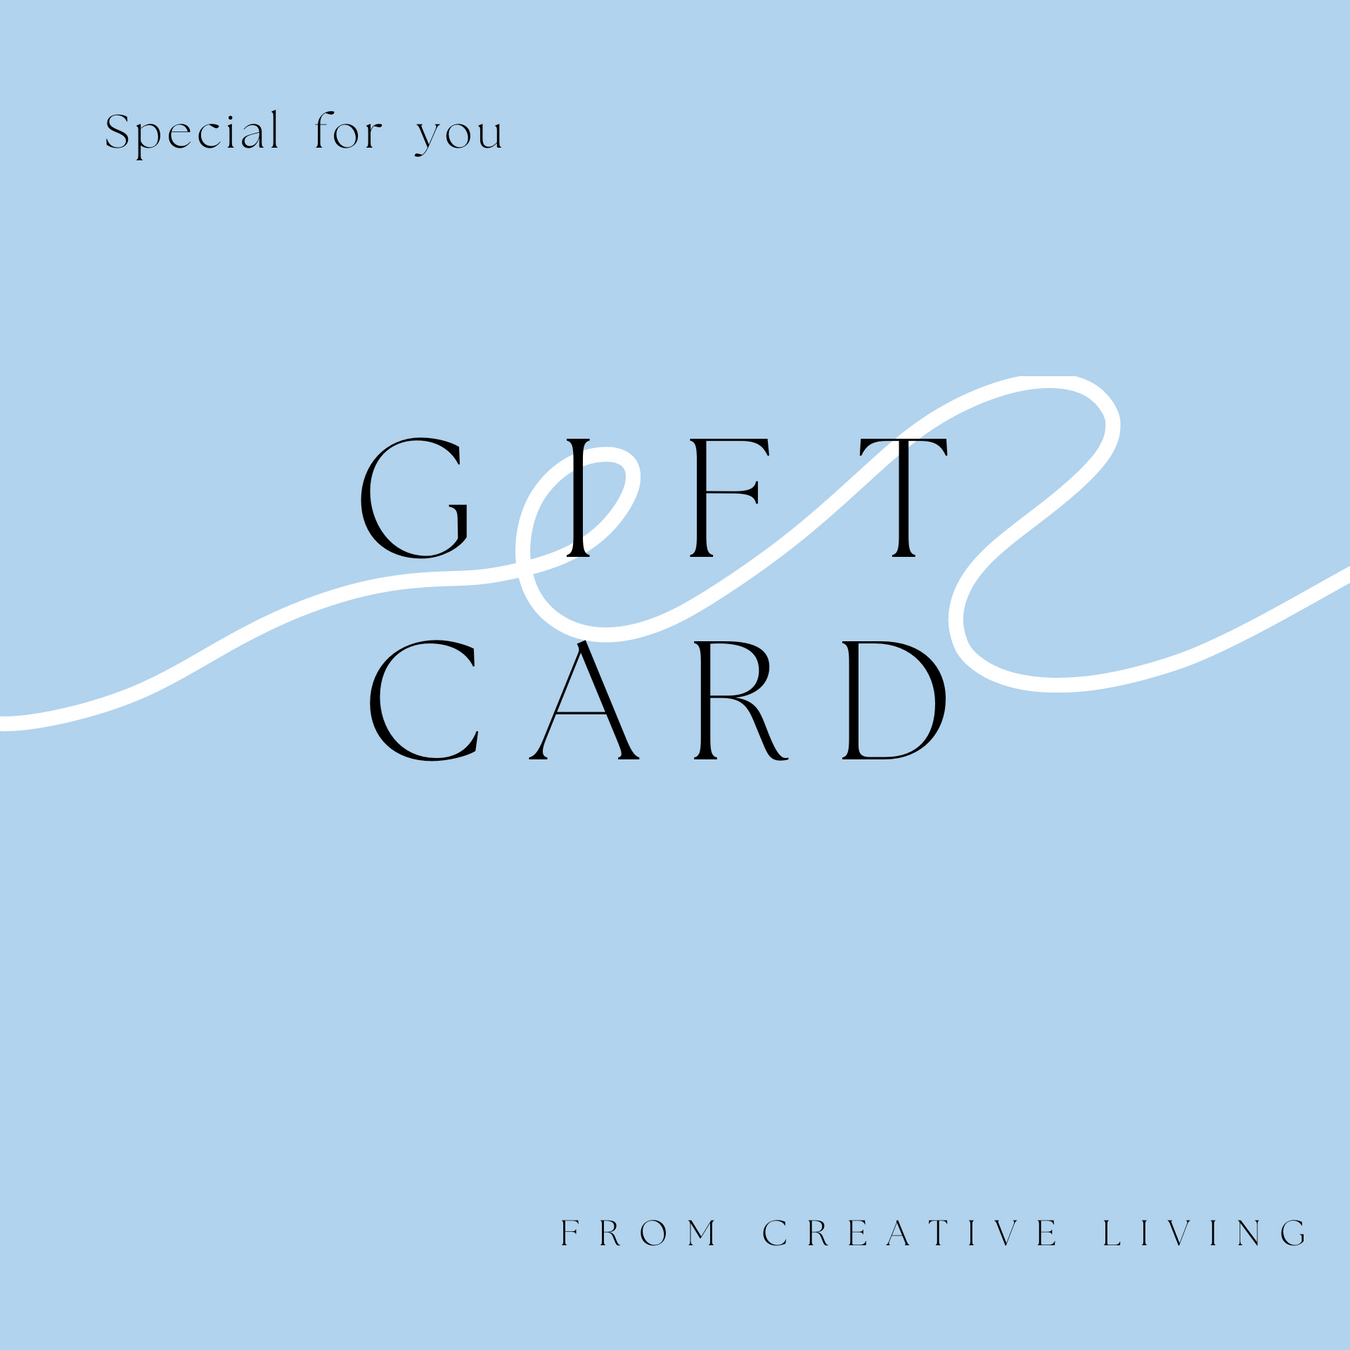  Gift Card Archives - Patio Furniture & Home Decor in South Africa | Creative Living